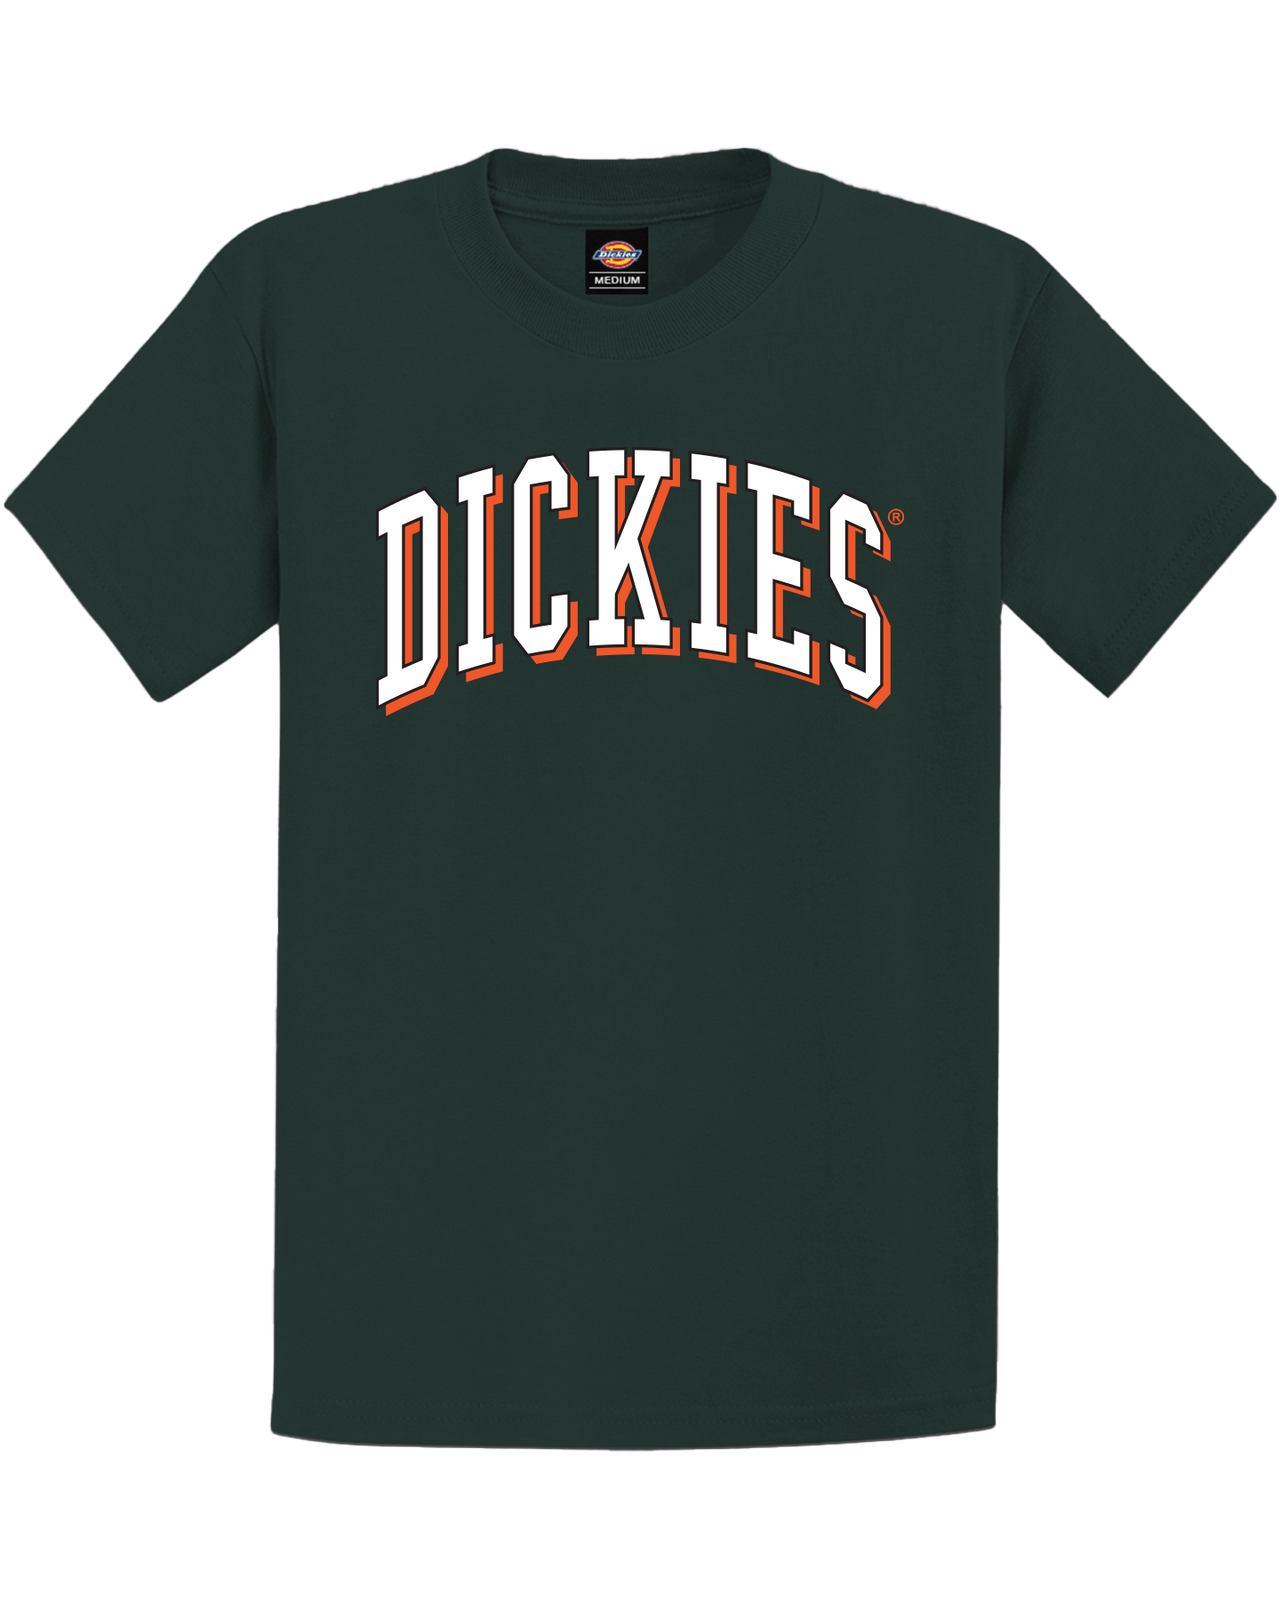 DICKIES - LONGVIEW CLASSIC FIT YOUTH TEE - SPRUCE